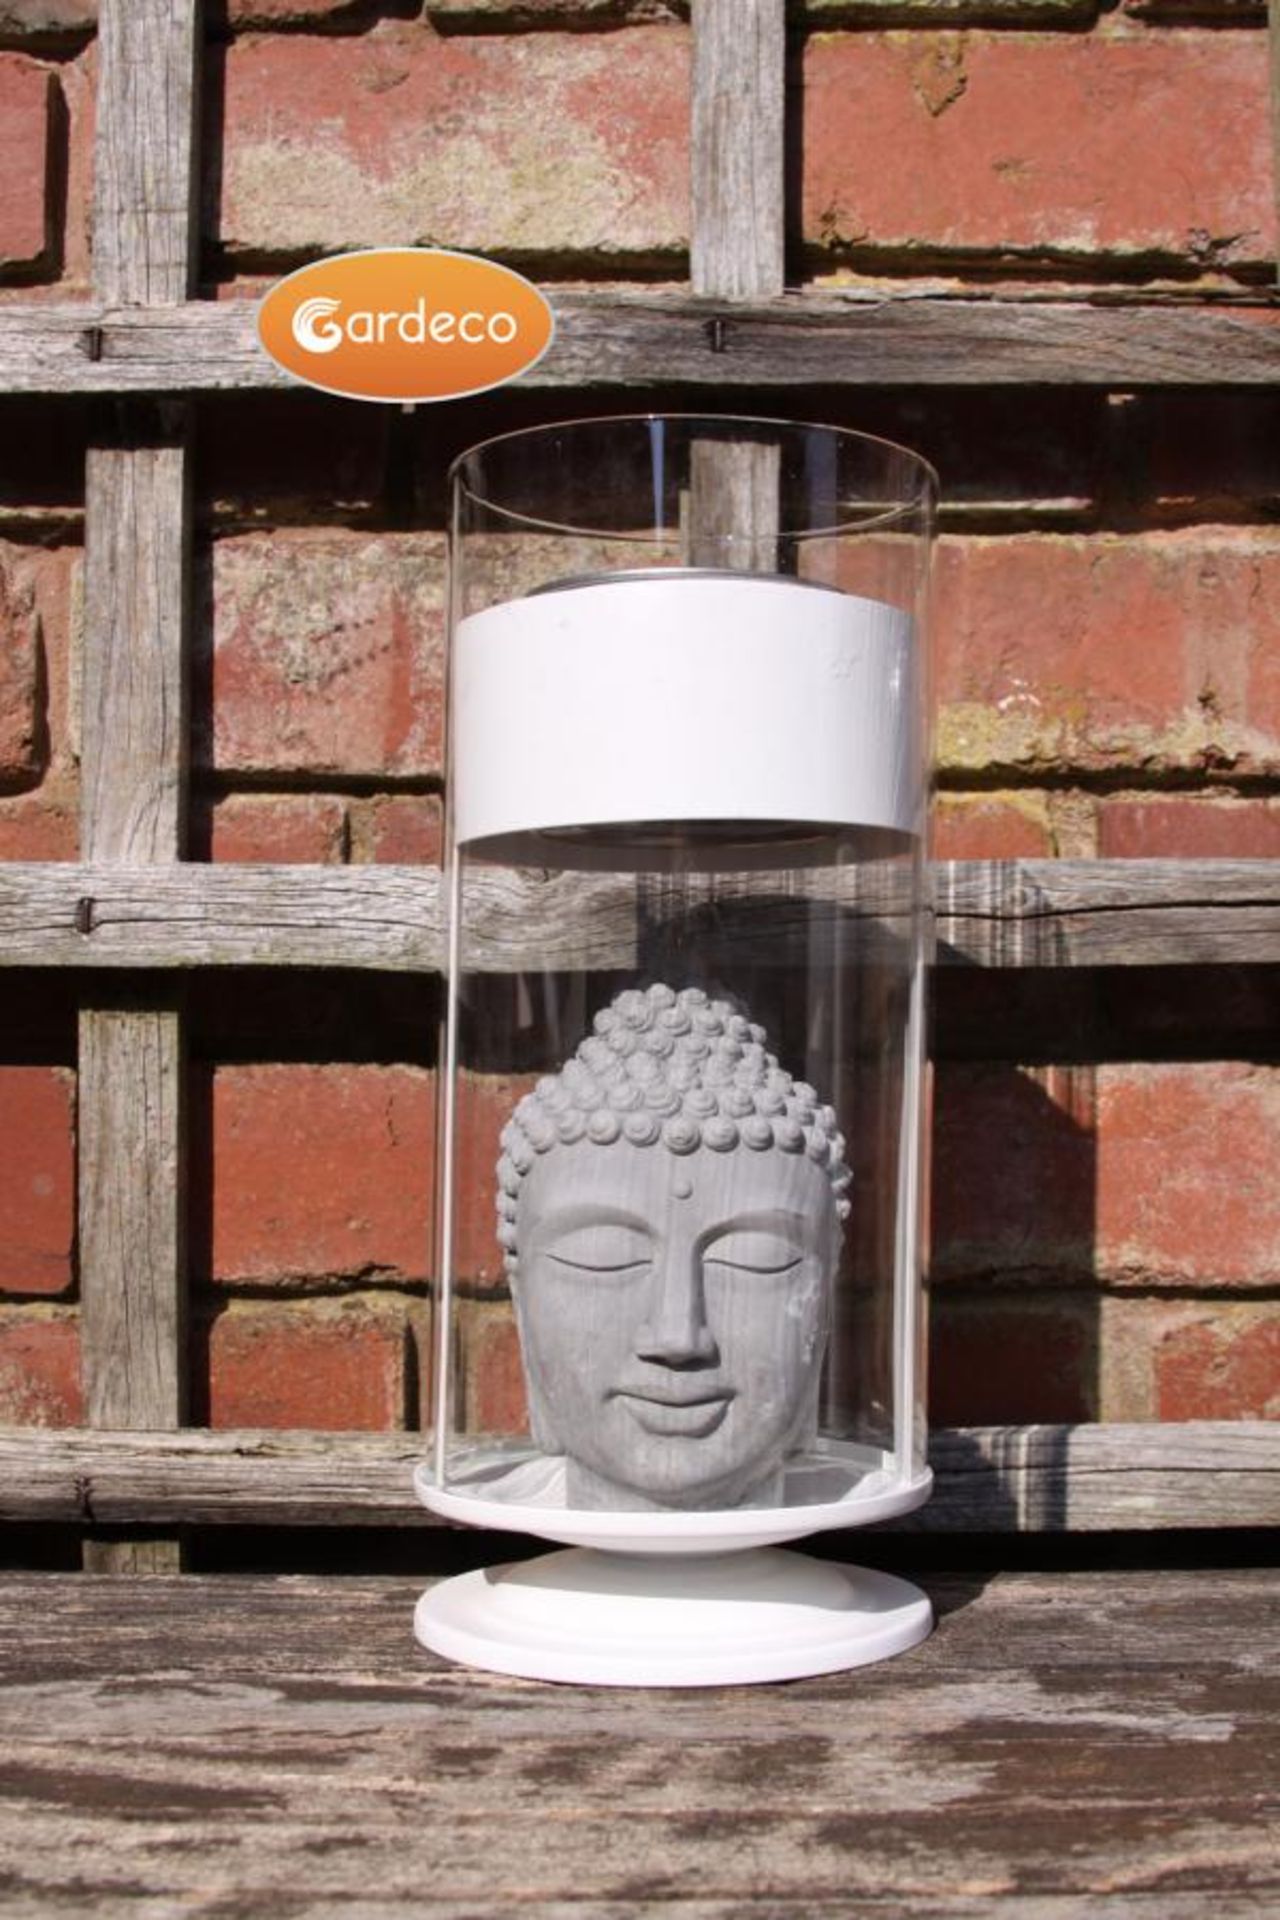 10pcs Brand new and sealed Gardeco Buddha design indoor/outdoor decorative smokeless INCLUDES 1 free